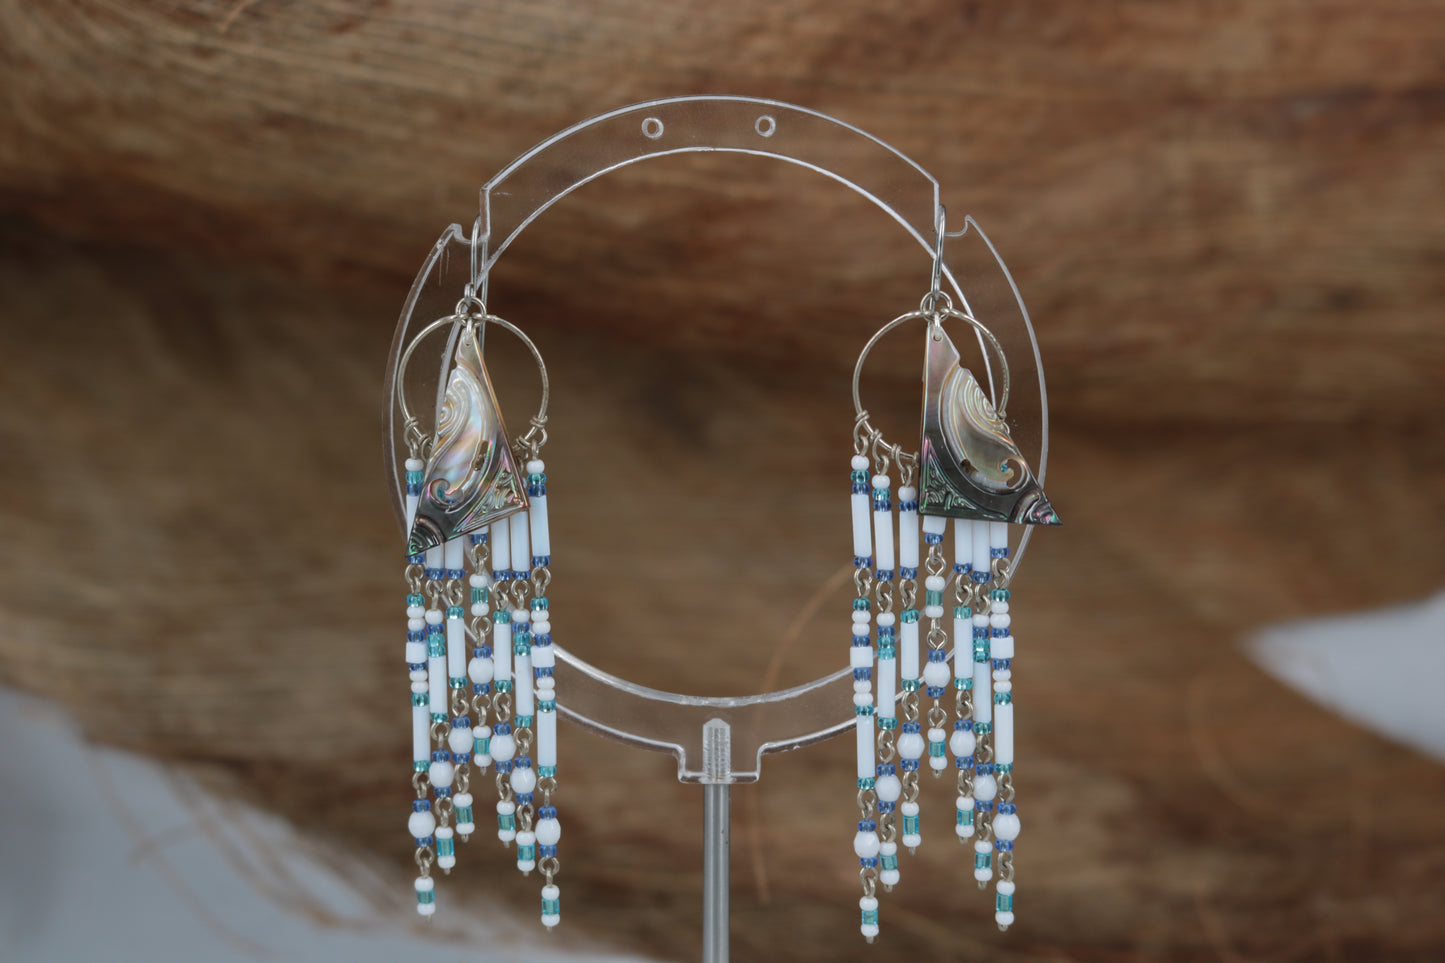 Boho style earrings with Tahitian designed mother of pearl